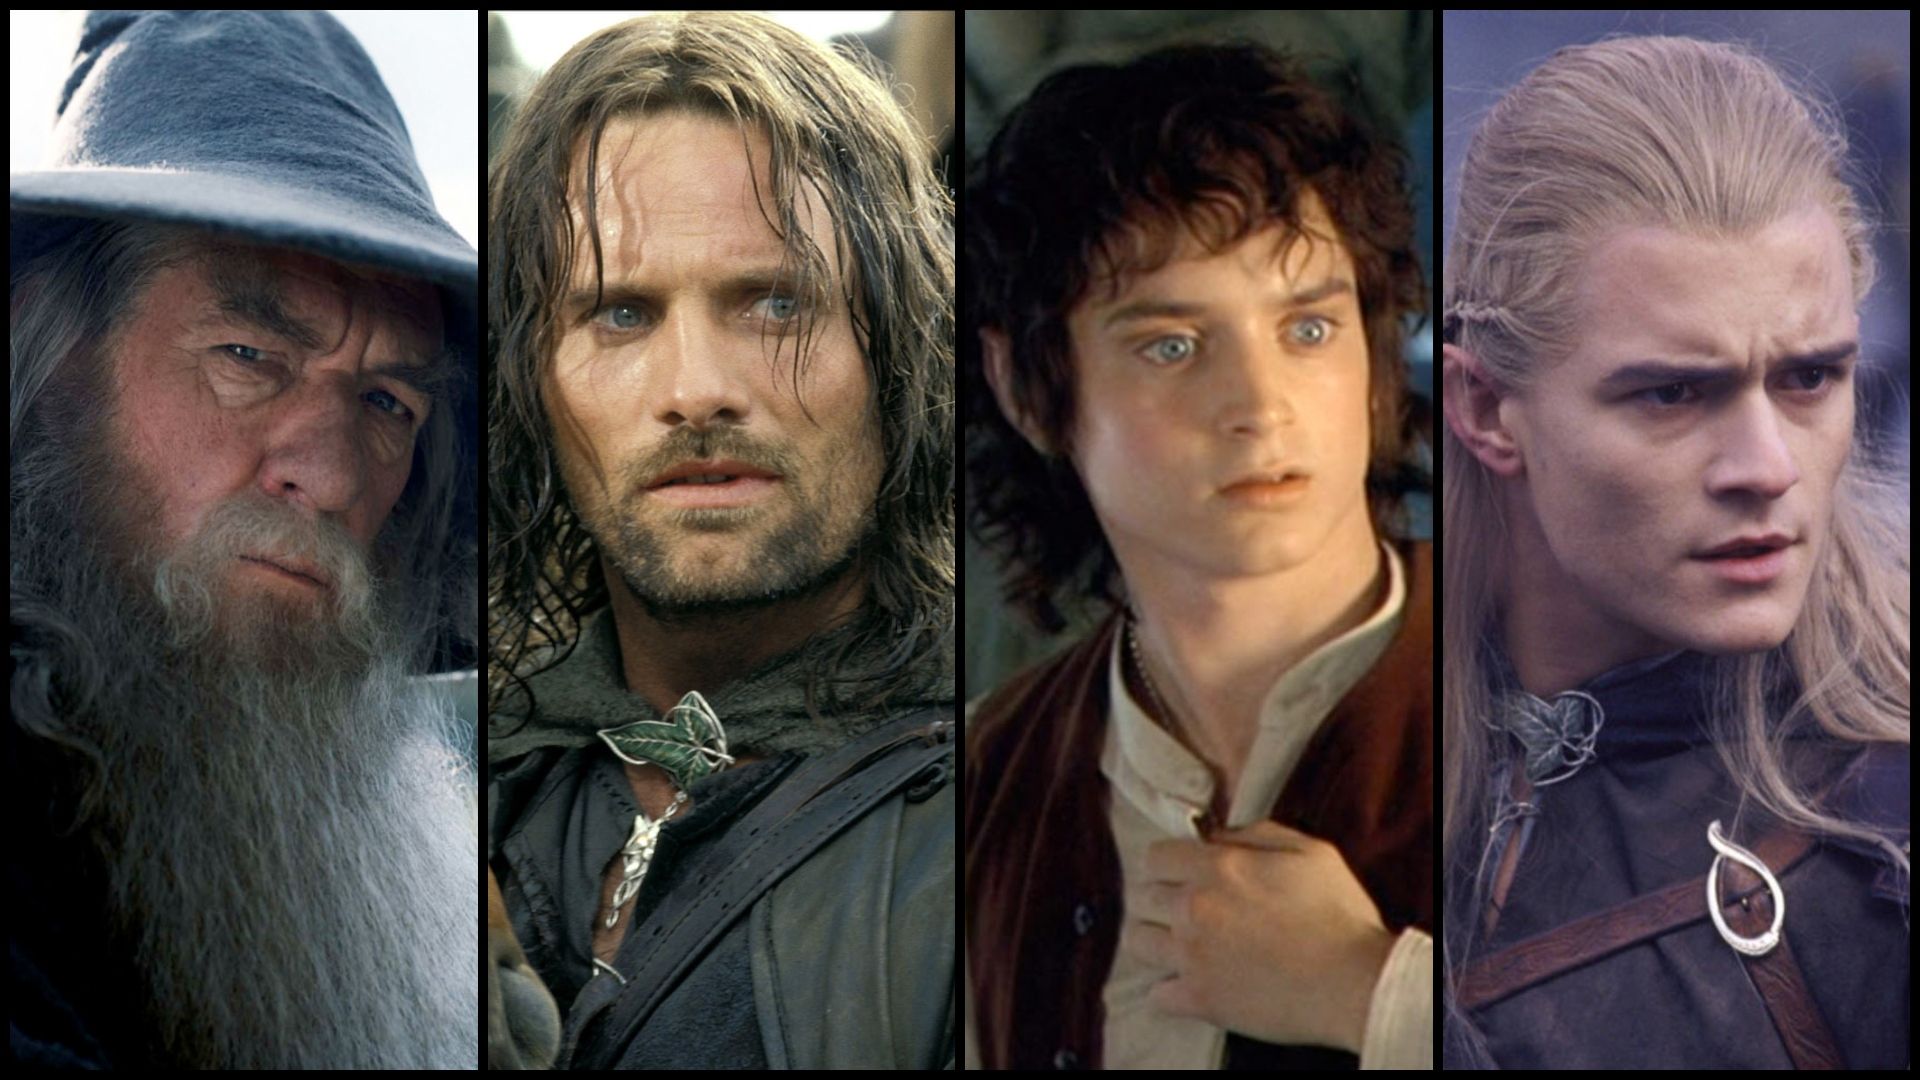 Dronning Uartig Utilfreds Lord of the Rings: The Fellowship, Ranked By Bravery